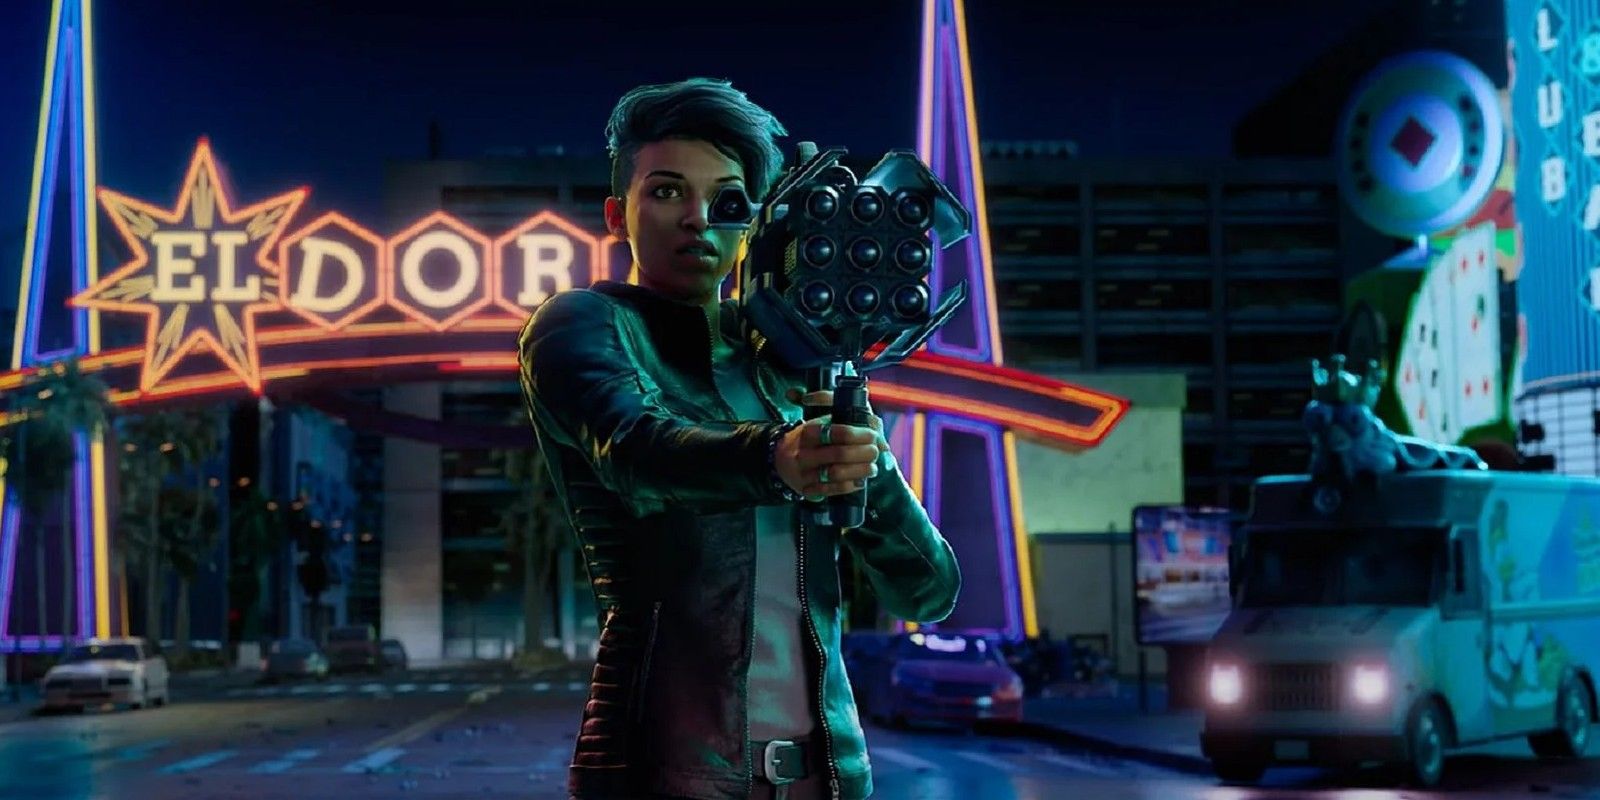 An image of the Boss holding a rocket launcher in the trailer for the Saints Row reboot.